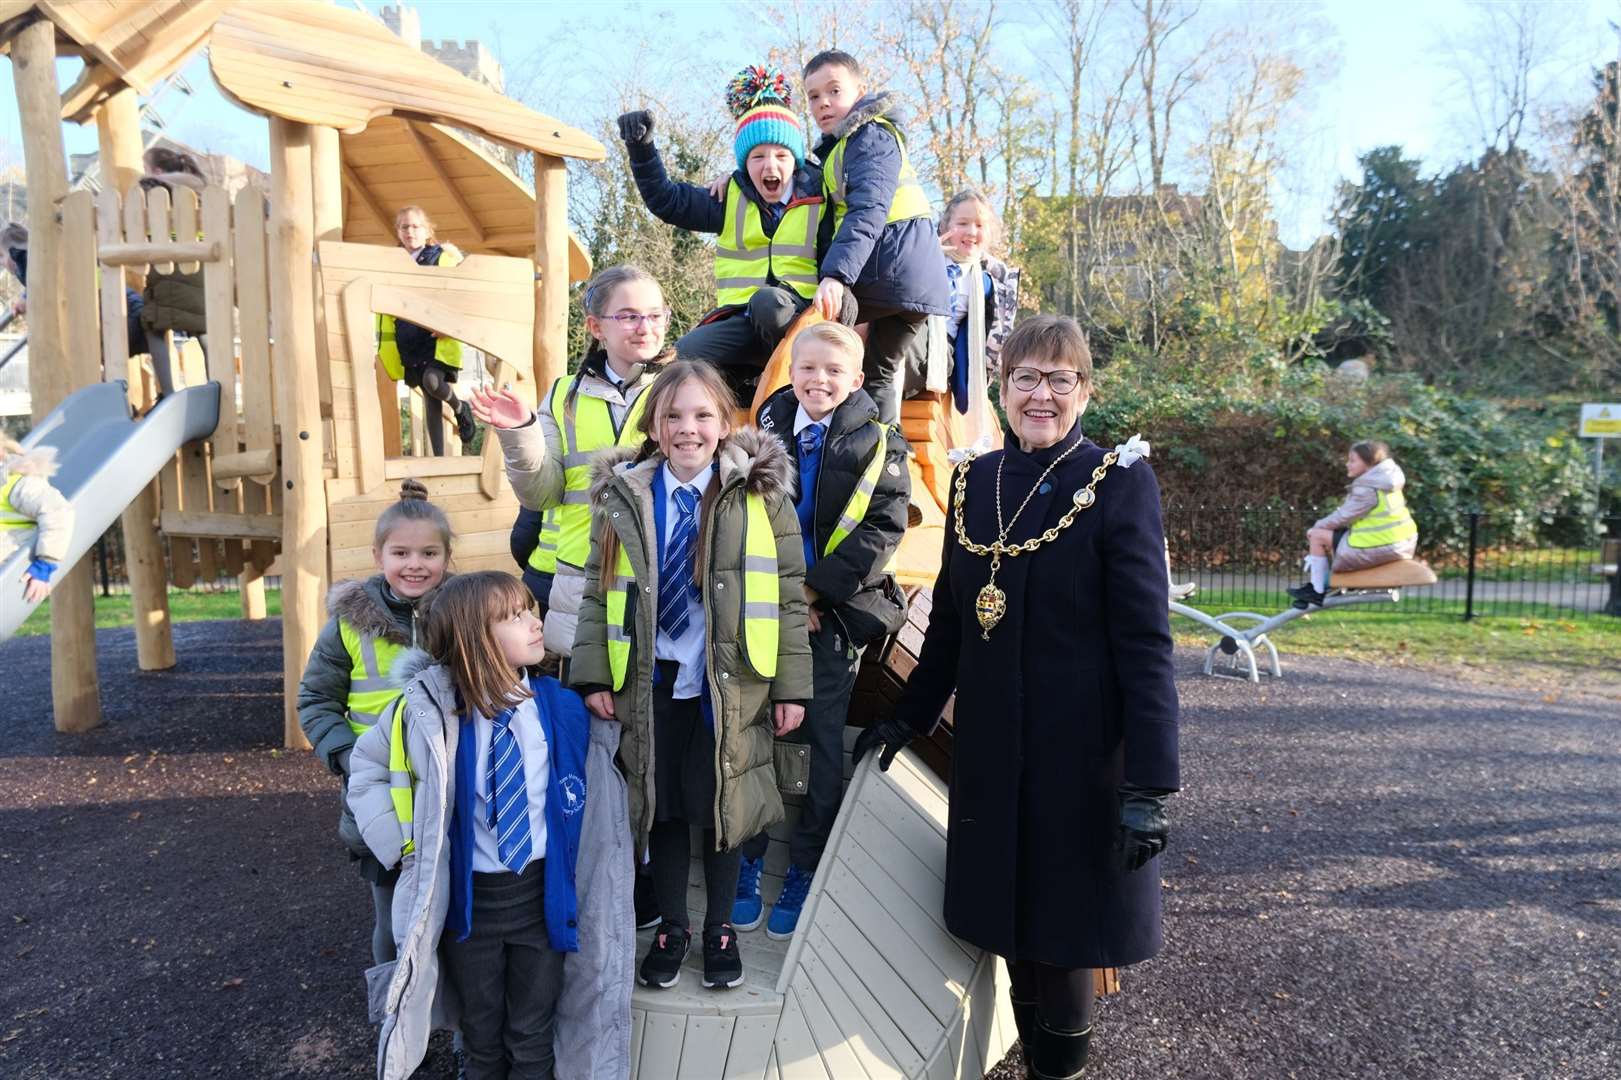 The new play area cost Maidstone Borough Council £80,000